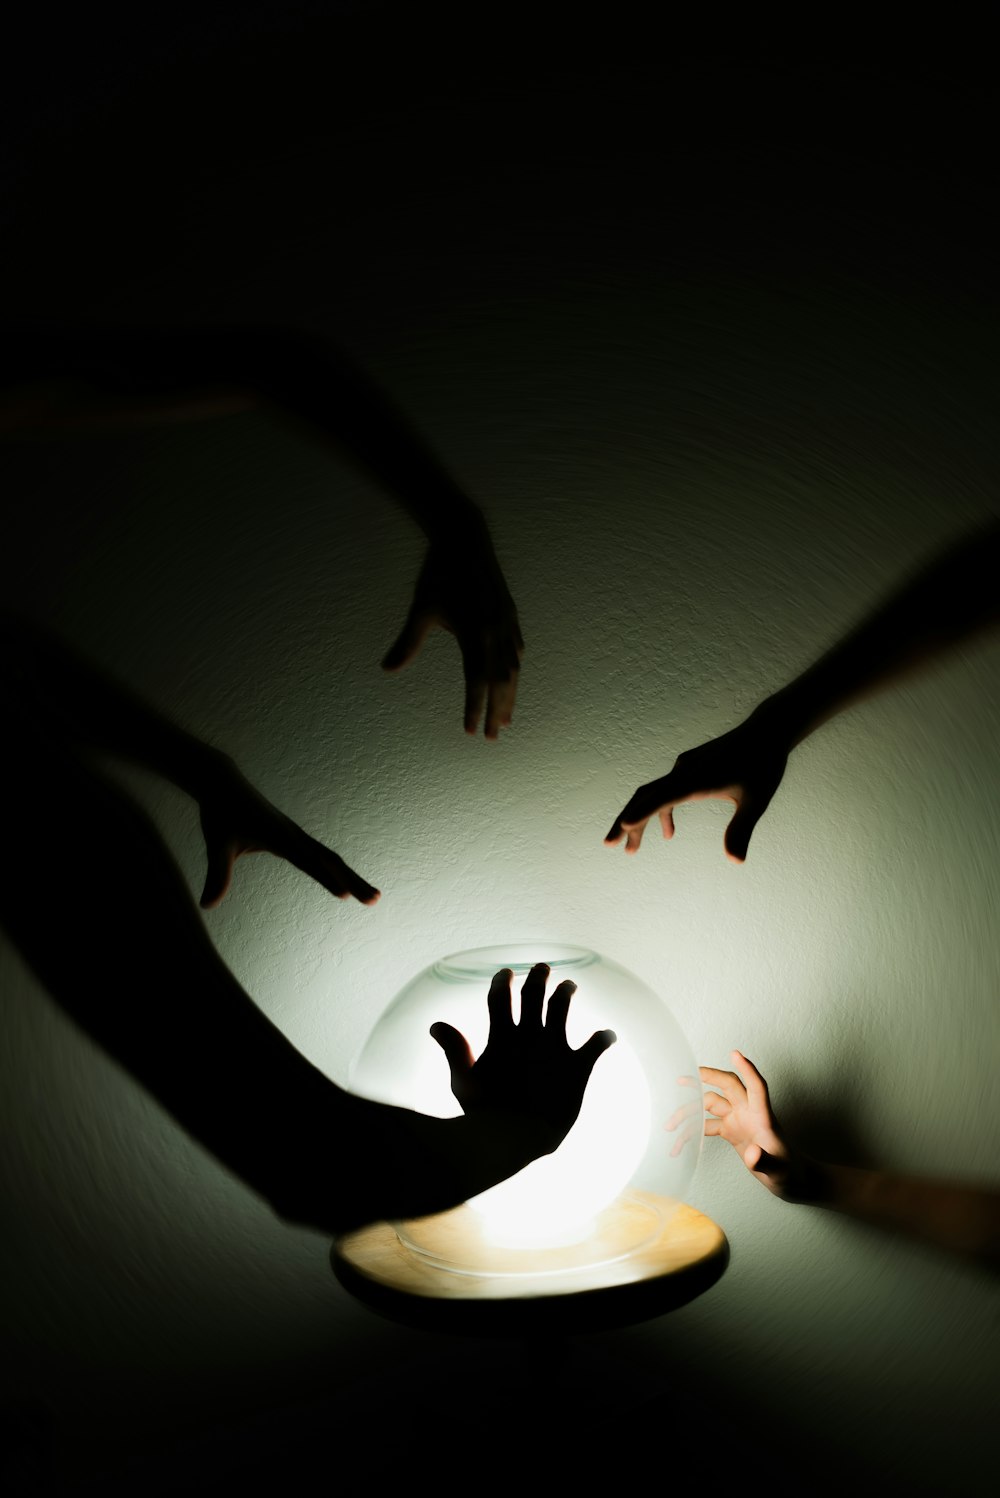 a group of people reaching for a light in the dark